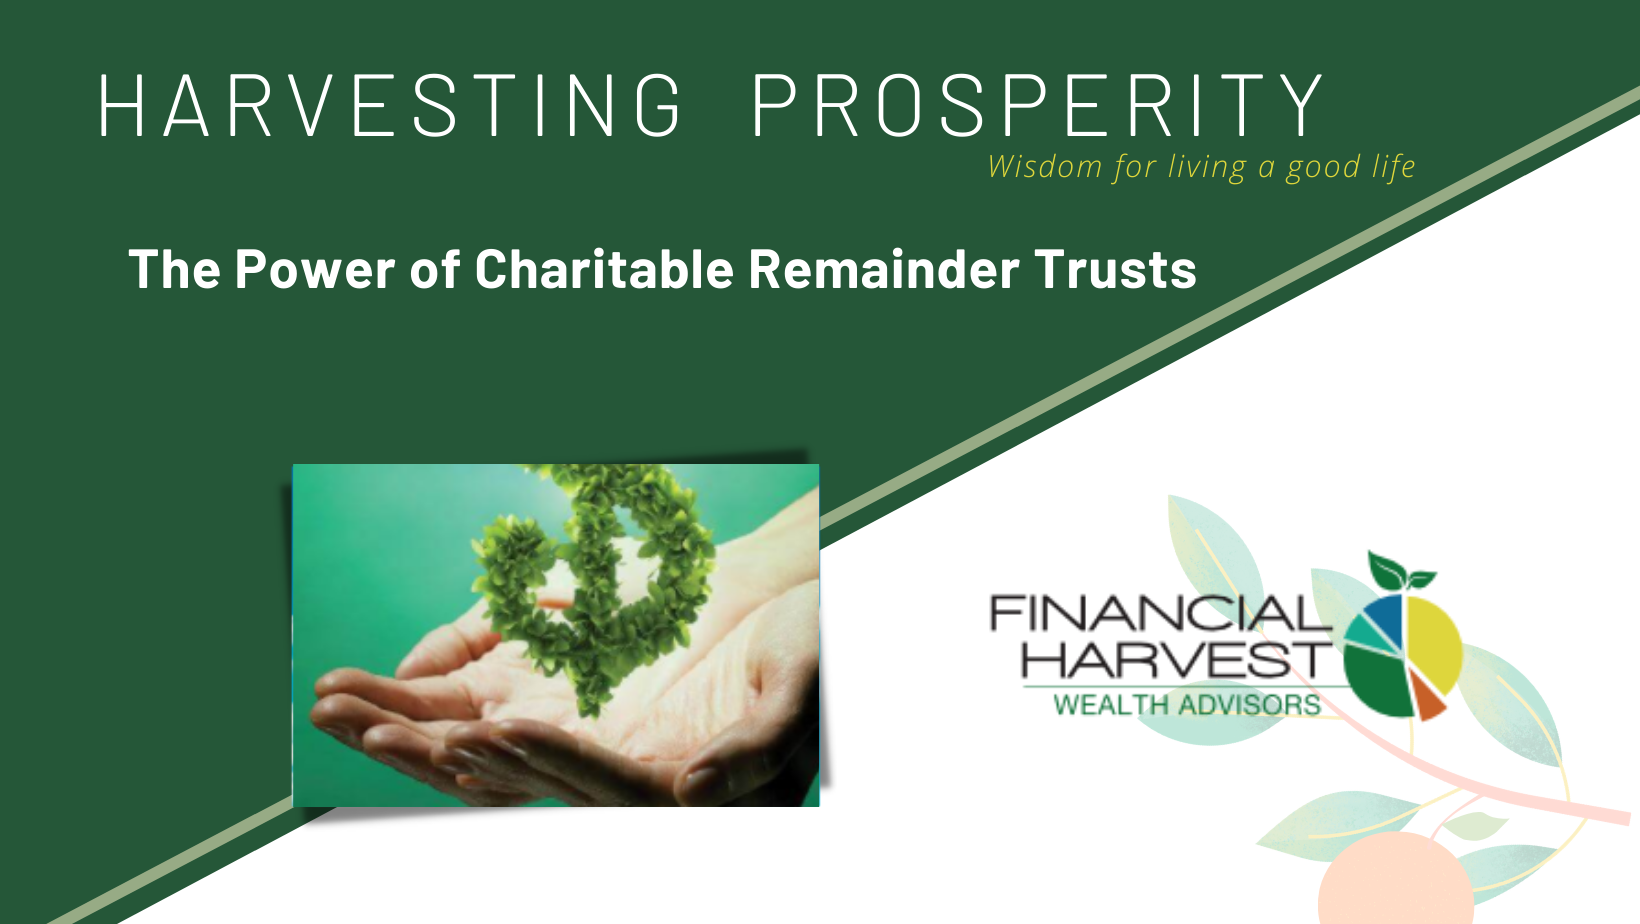 The power of charitable remainder trusts